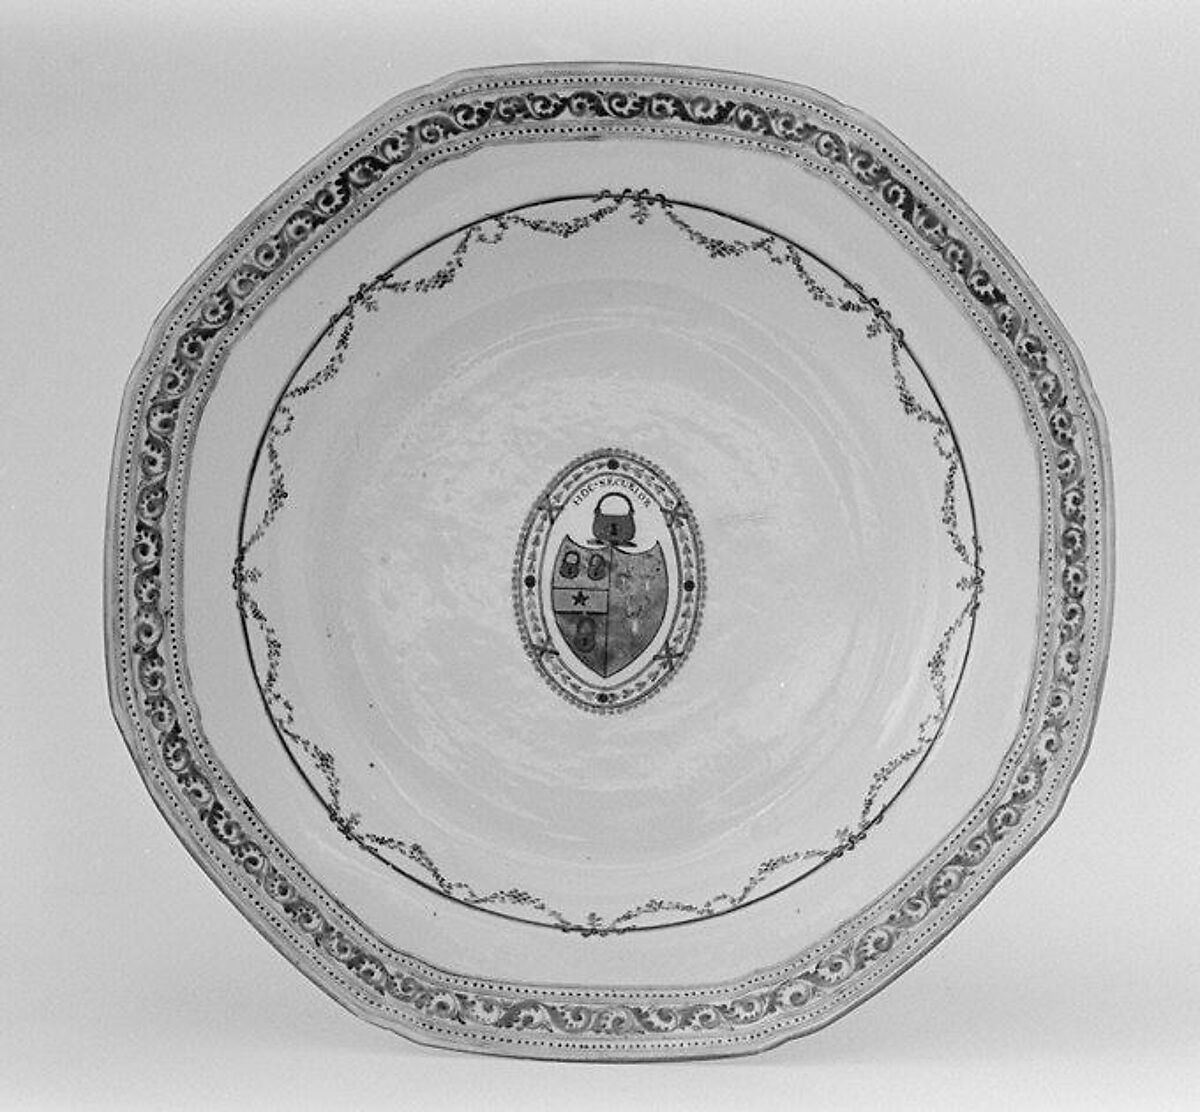 Soup plate (part of a service), Hard-paste porcelain, Chinese, for British market 